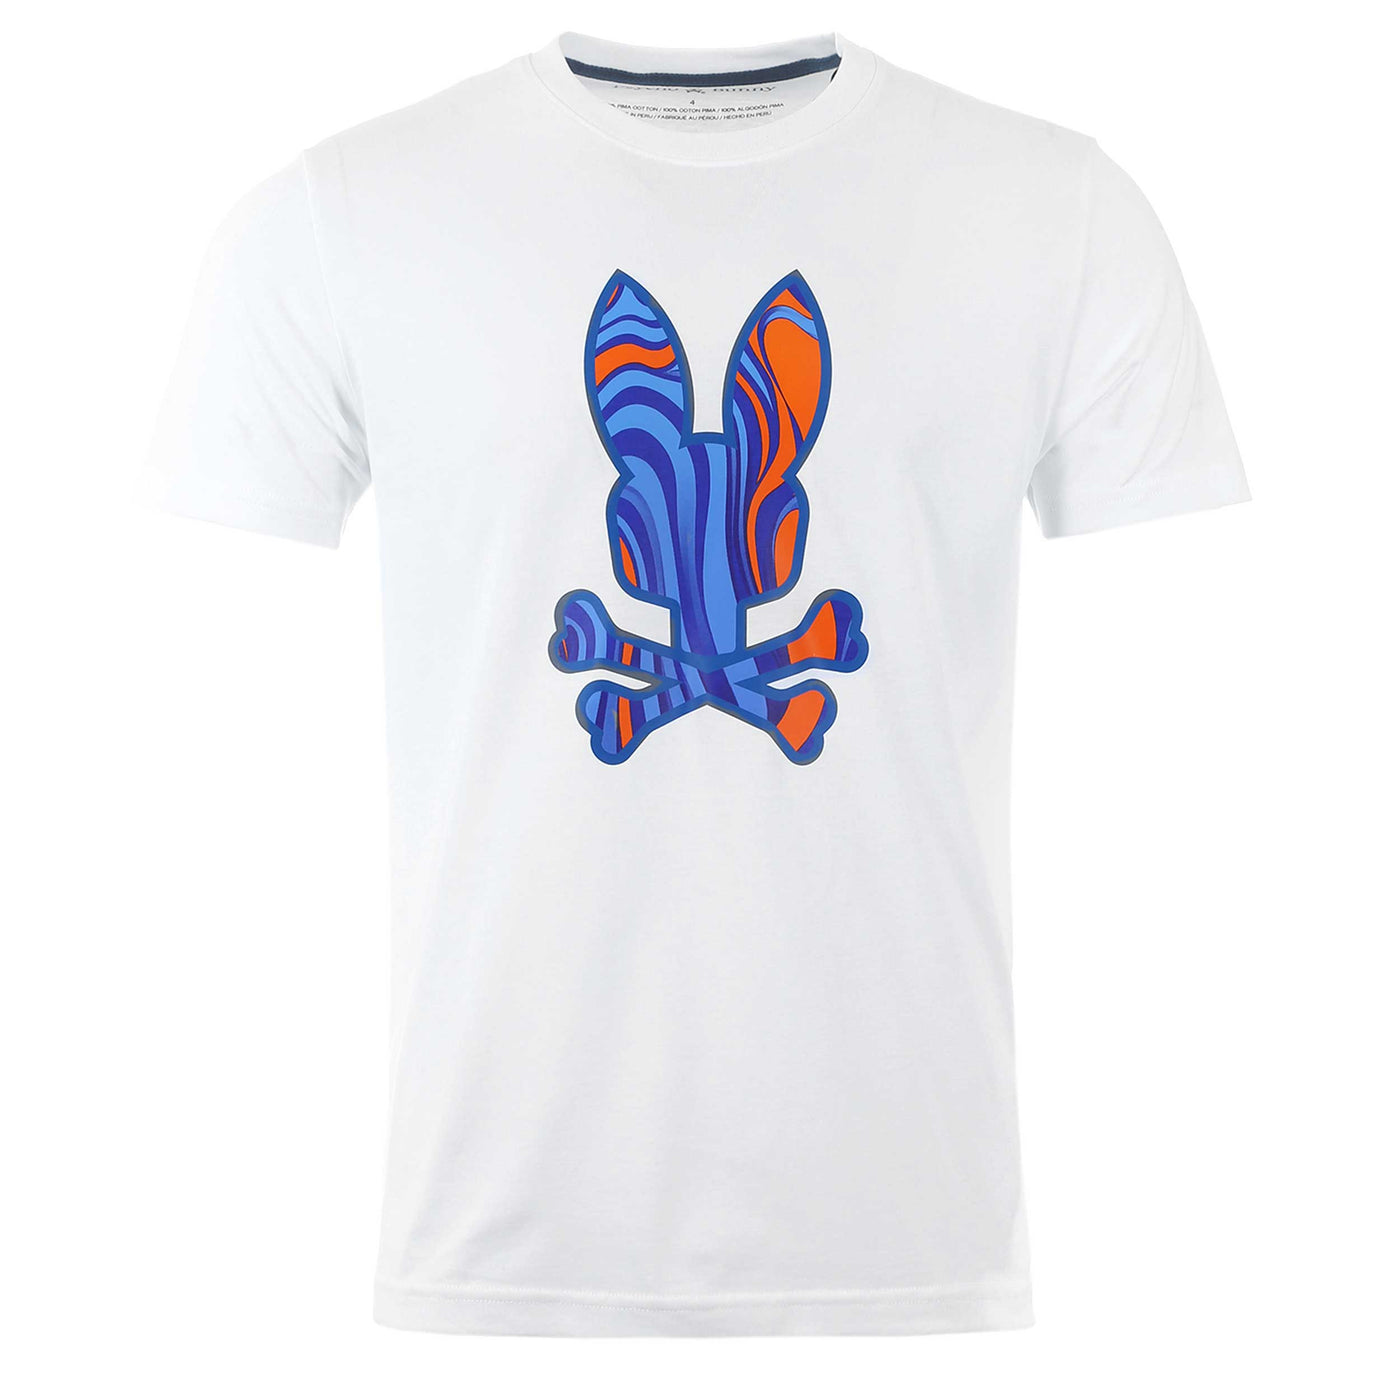 Psycho Bunny Nevada Graphic T-Shirt in White